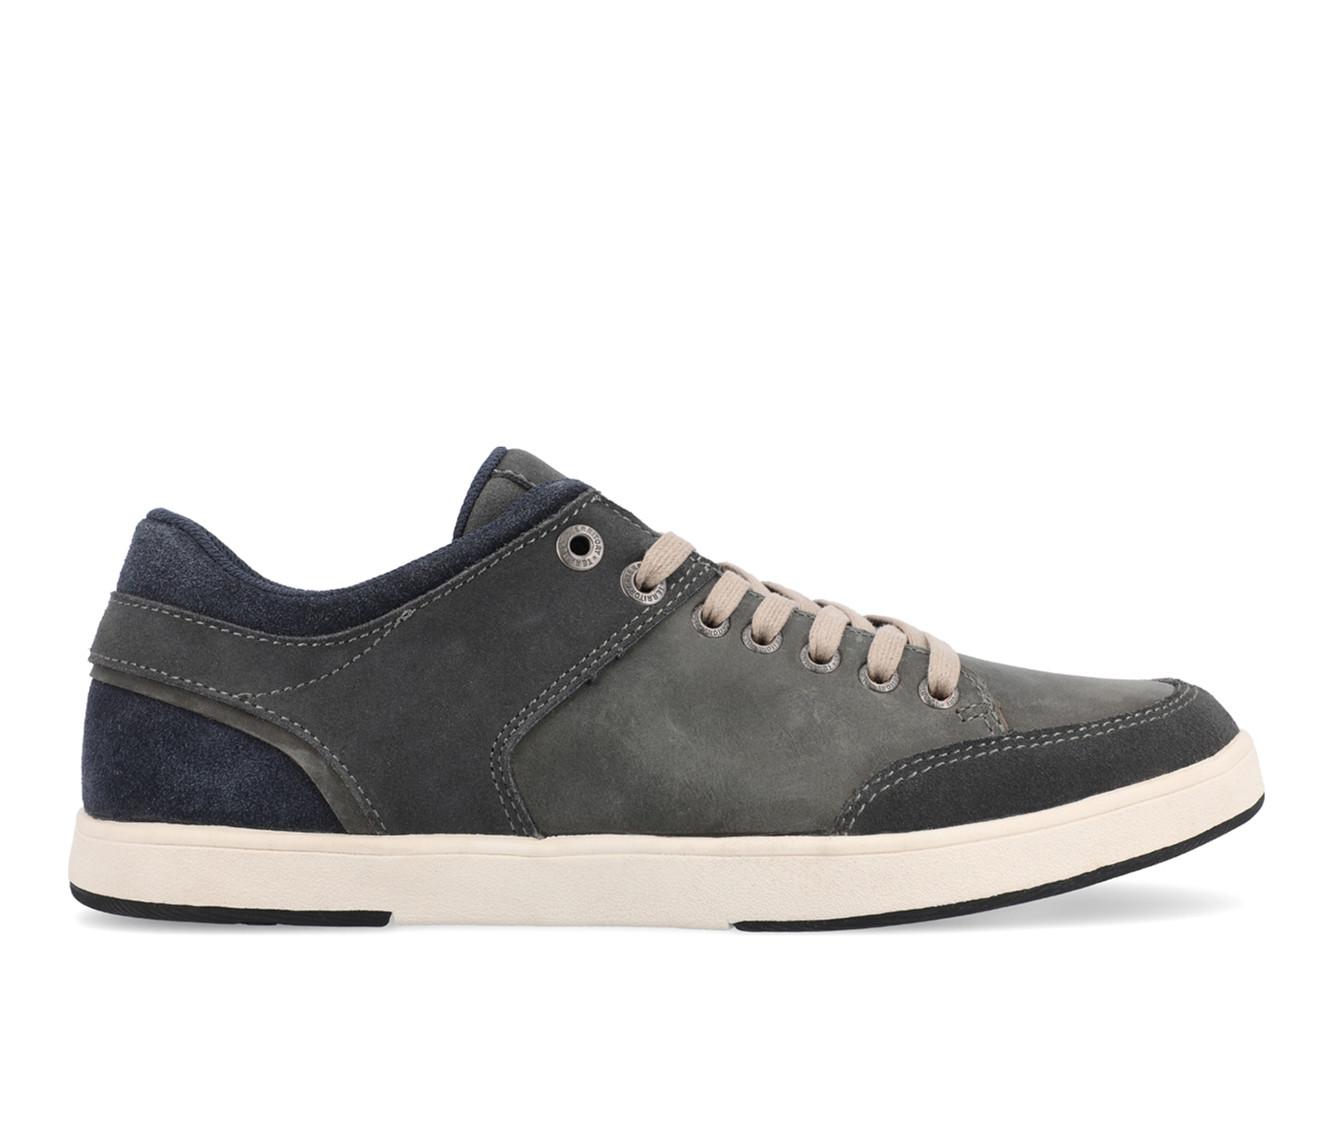 Men's Territory Pacer Casual Oxfords